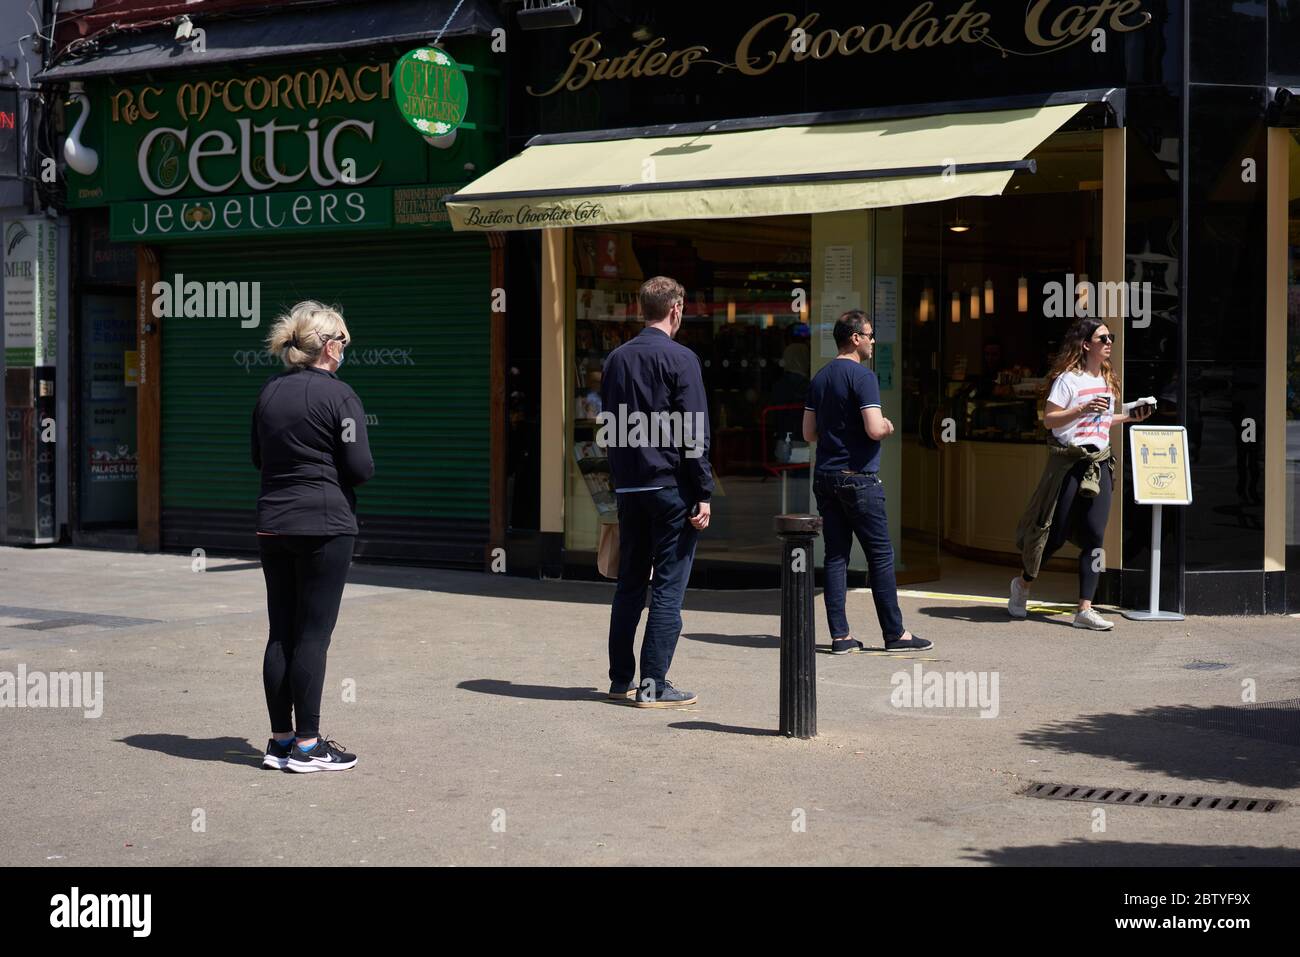 People social distancing while queuing for coffee in Dublin city, during the global coronavirus pandemic. Stock Photo